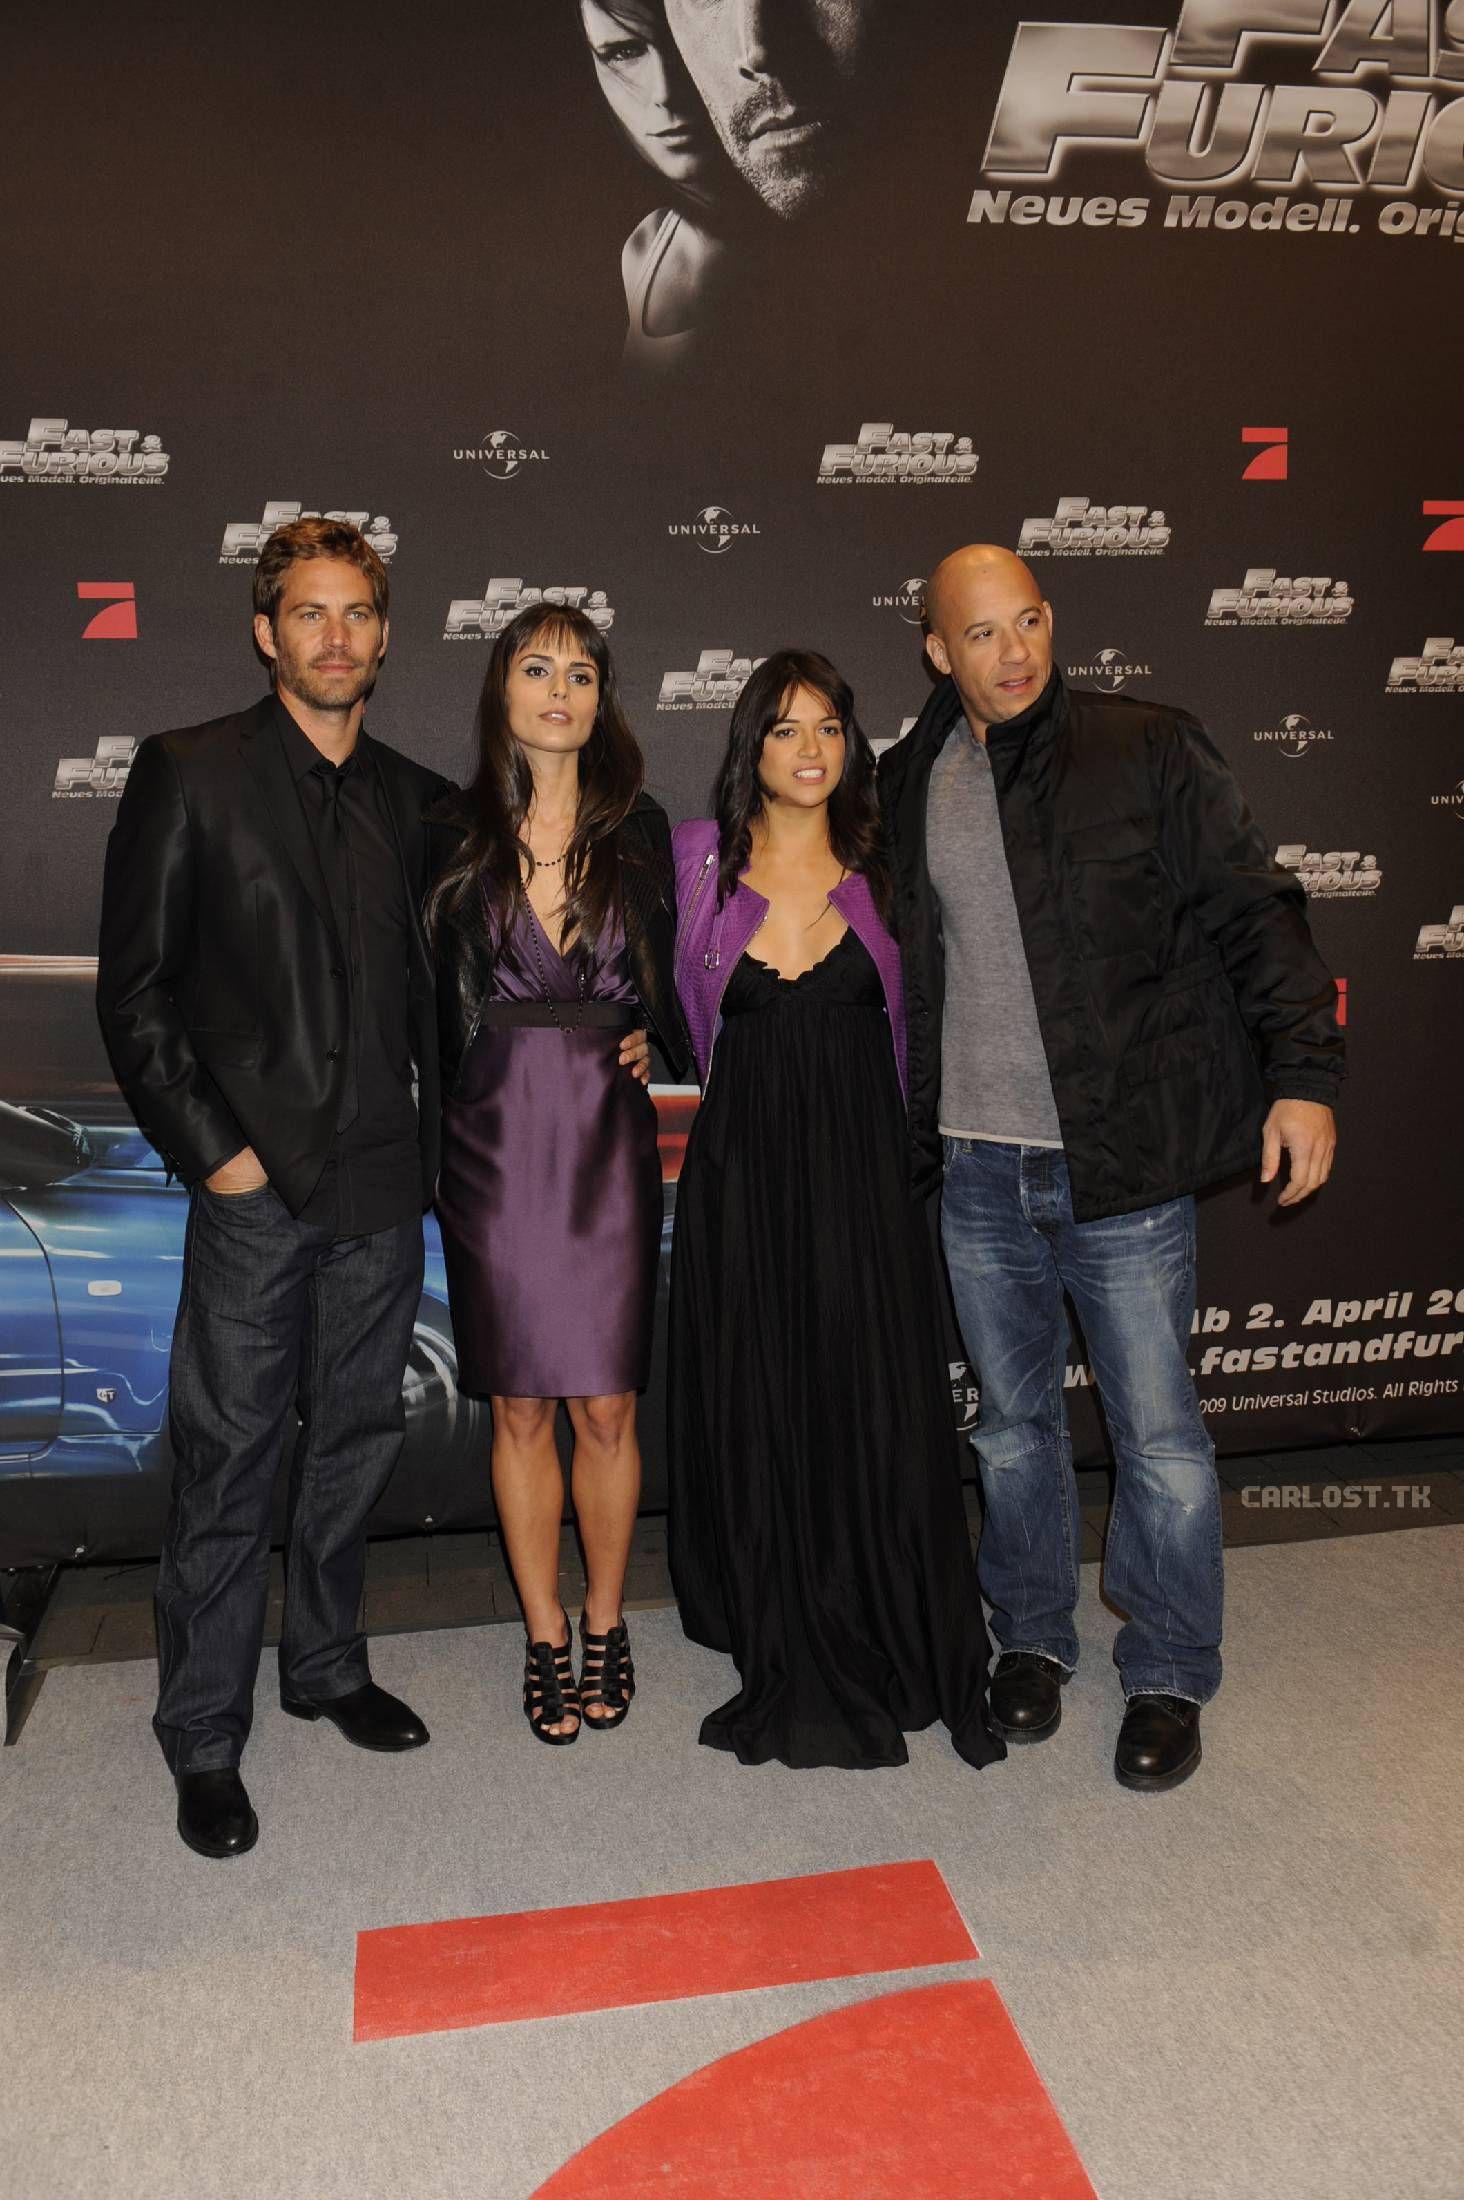 _and_Furious_bycarlost.blogspot.com_Premiere_Alemania_09.jpg